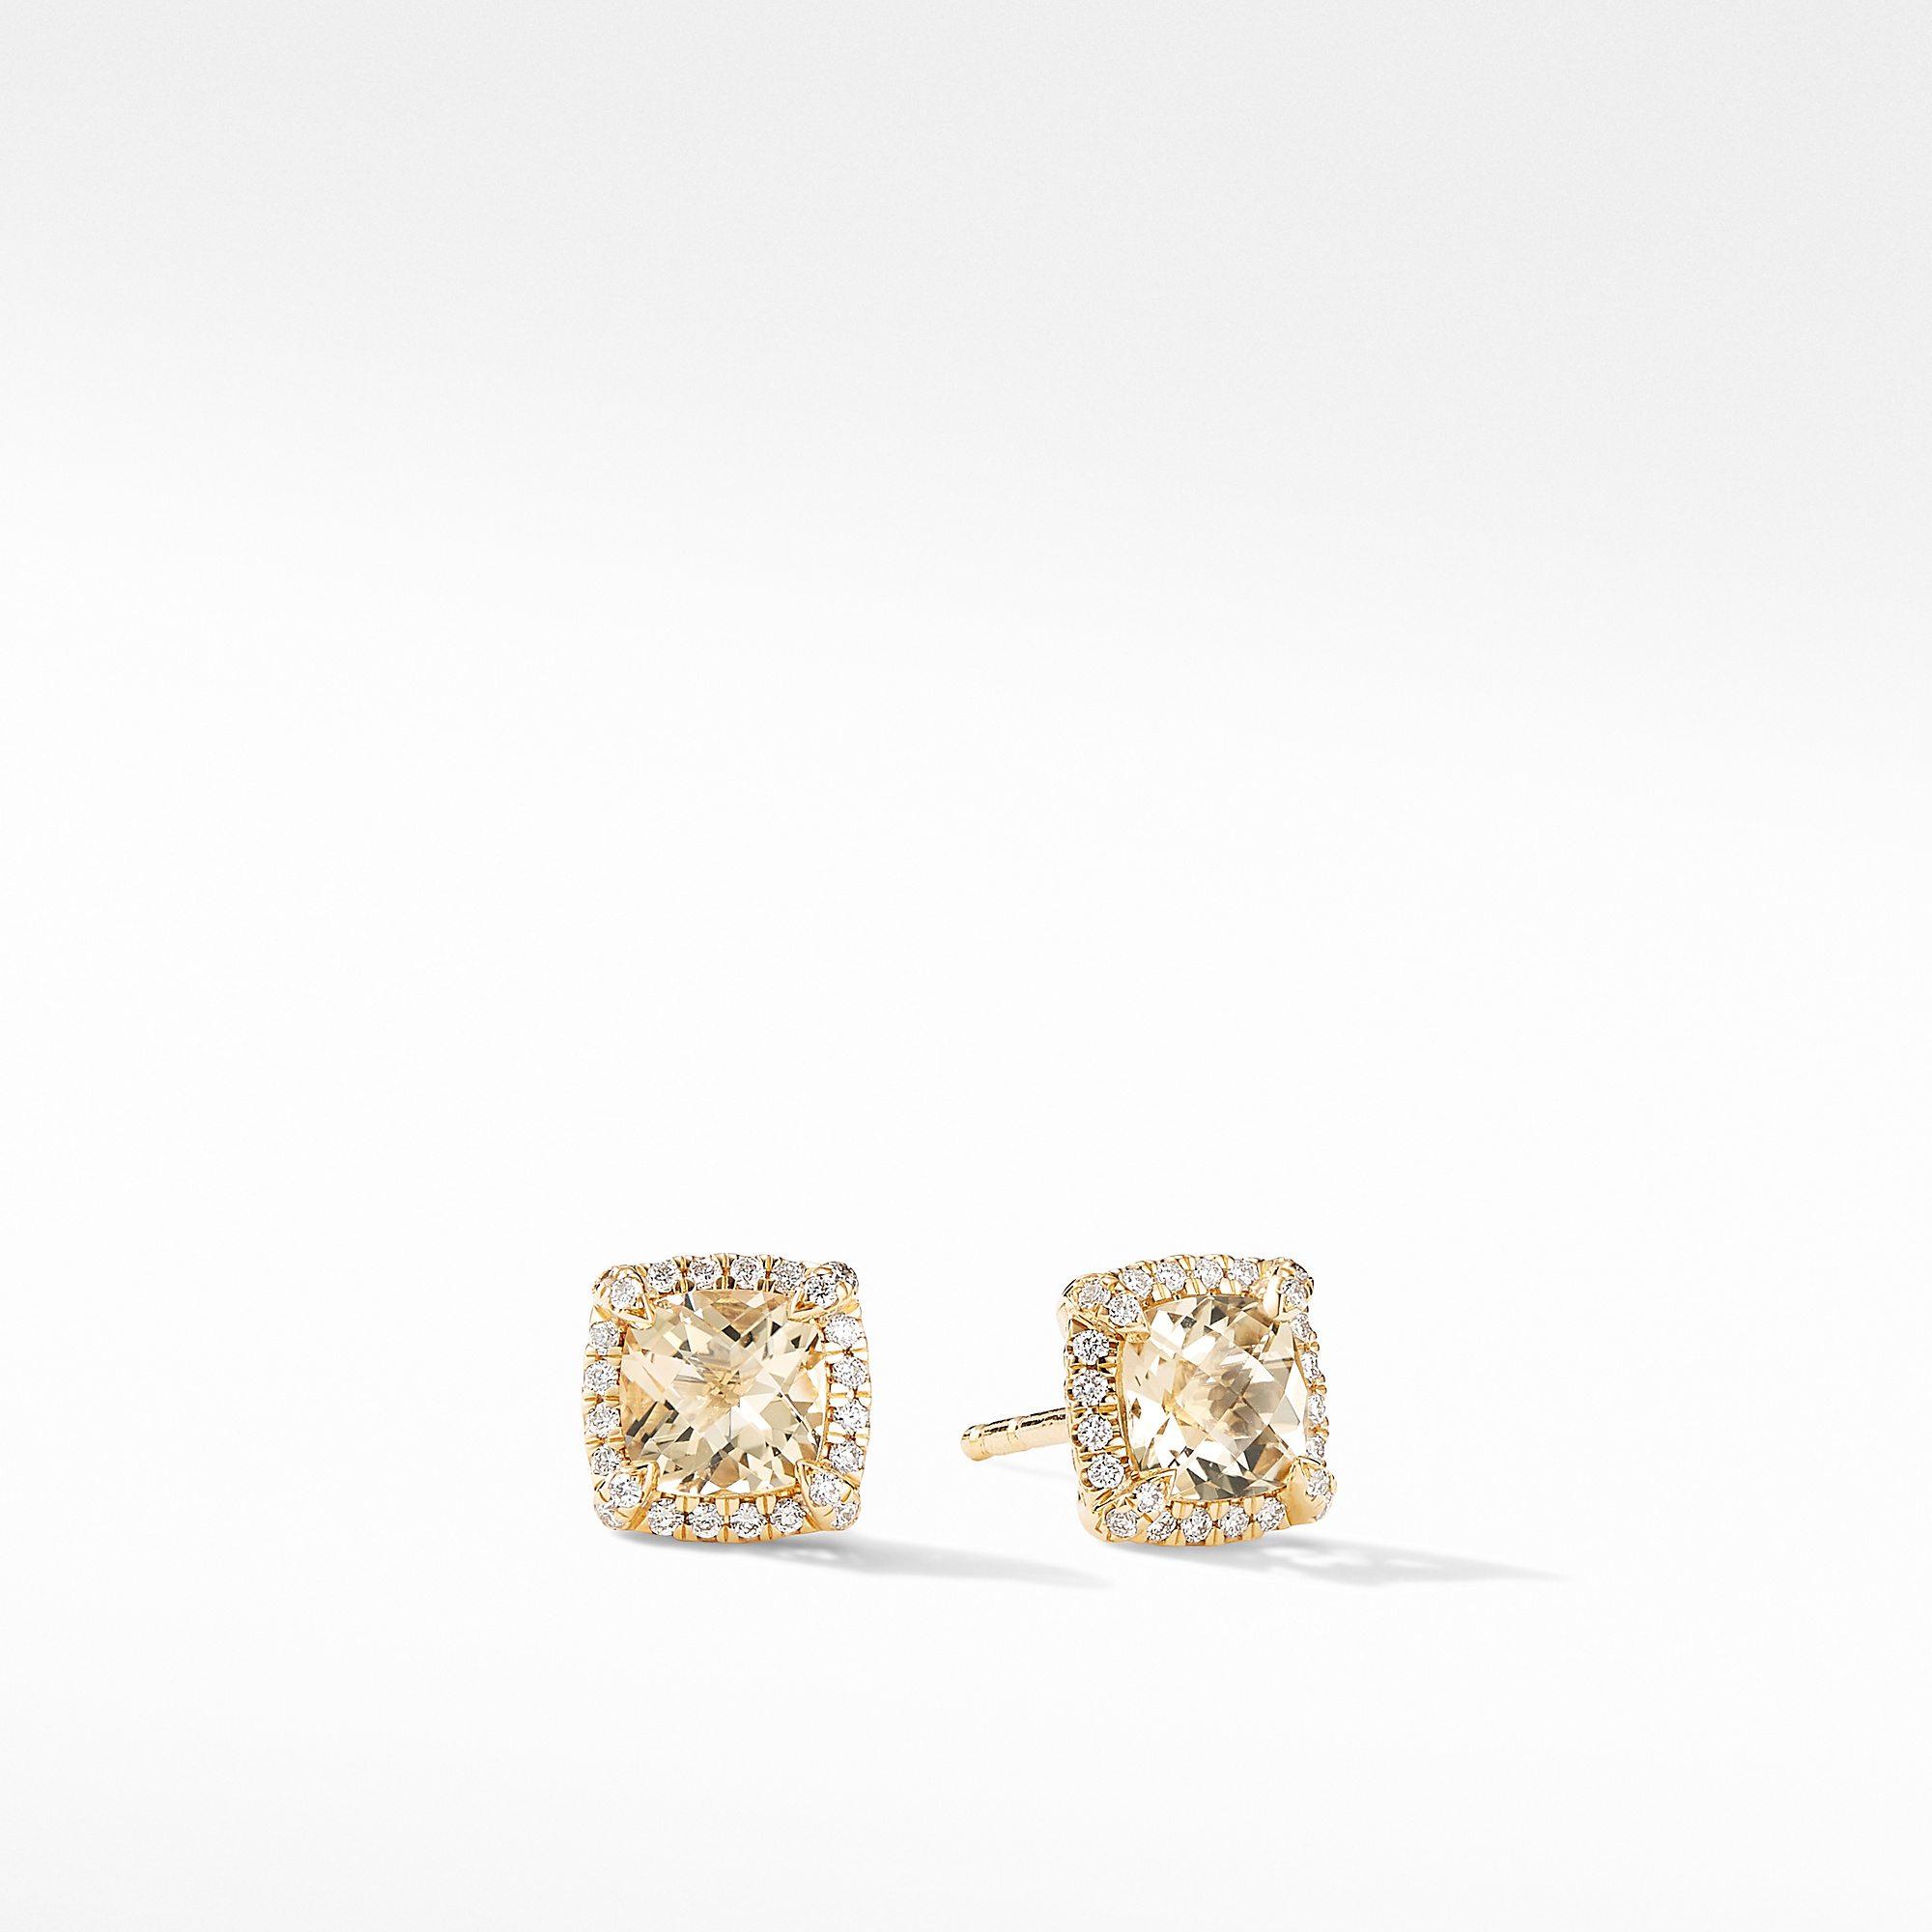 David Yurman Petite Chatelaine Pave Bezel Stud Earrings in 18k Yellow Gold with Champagne Citrine